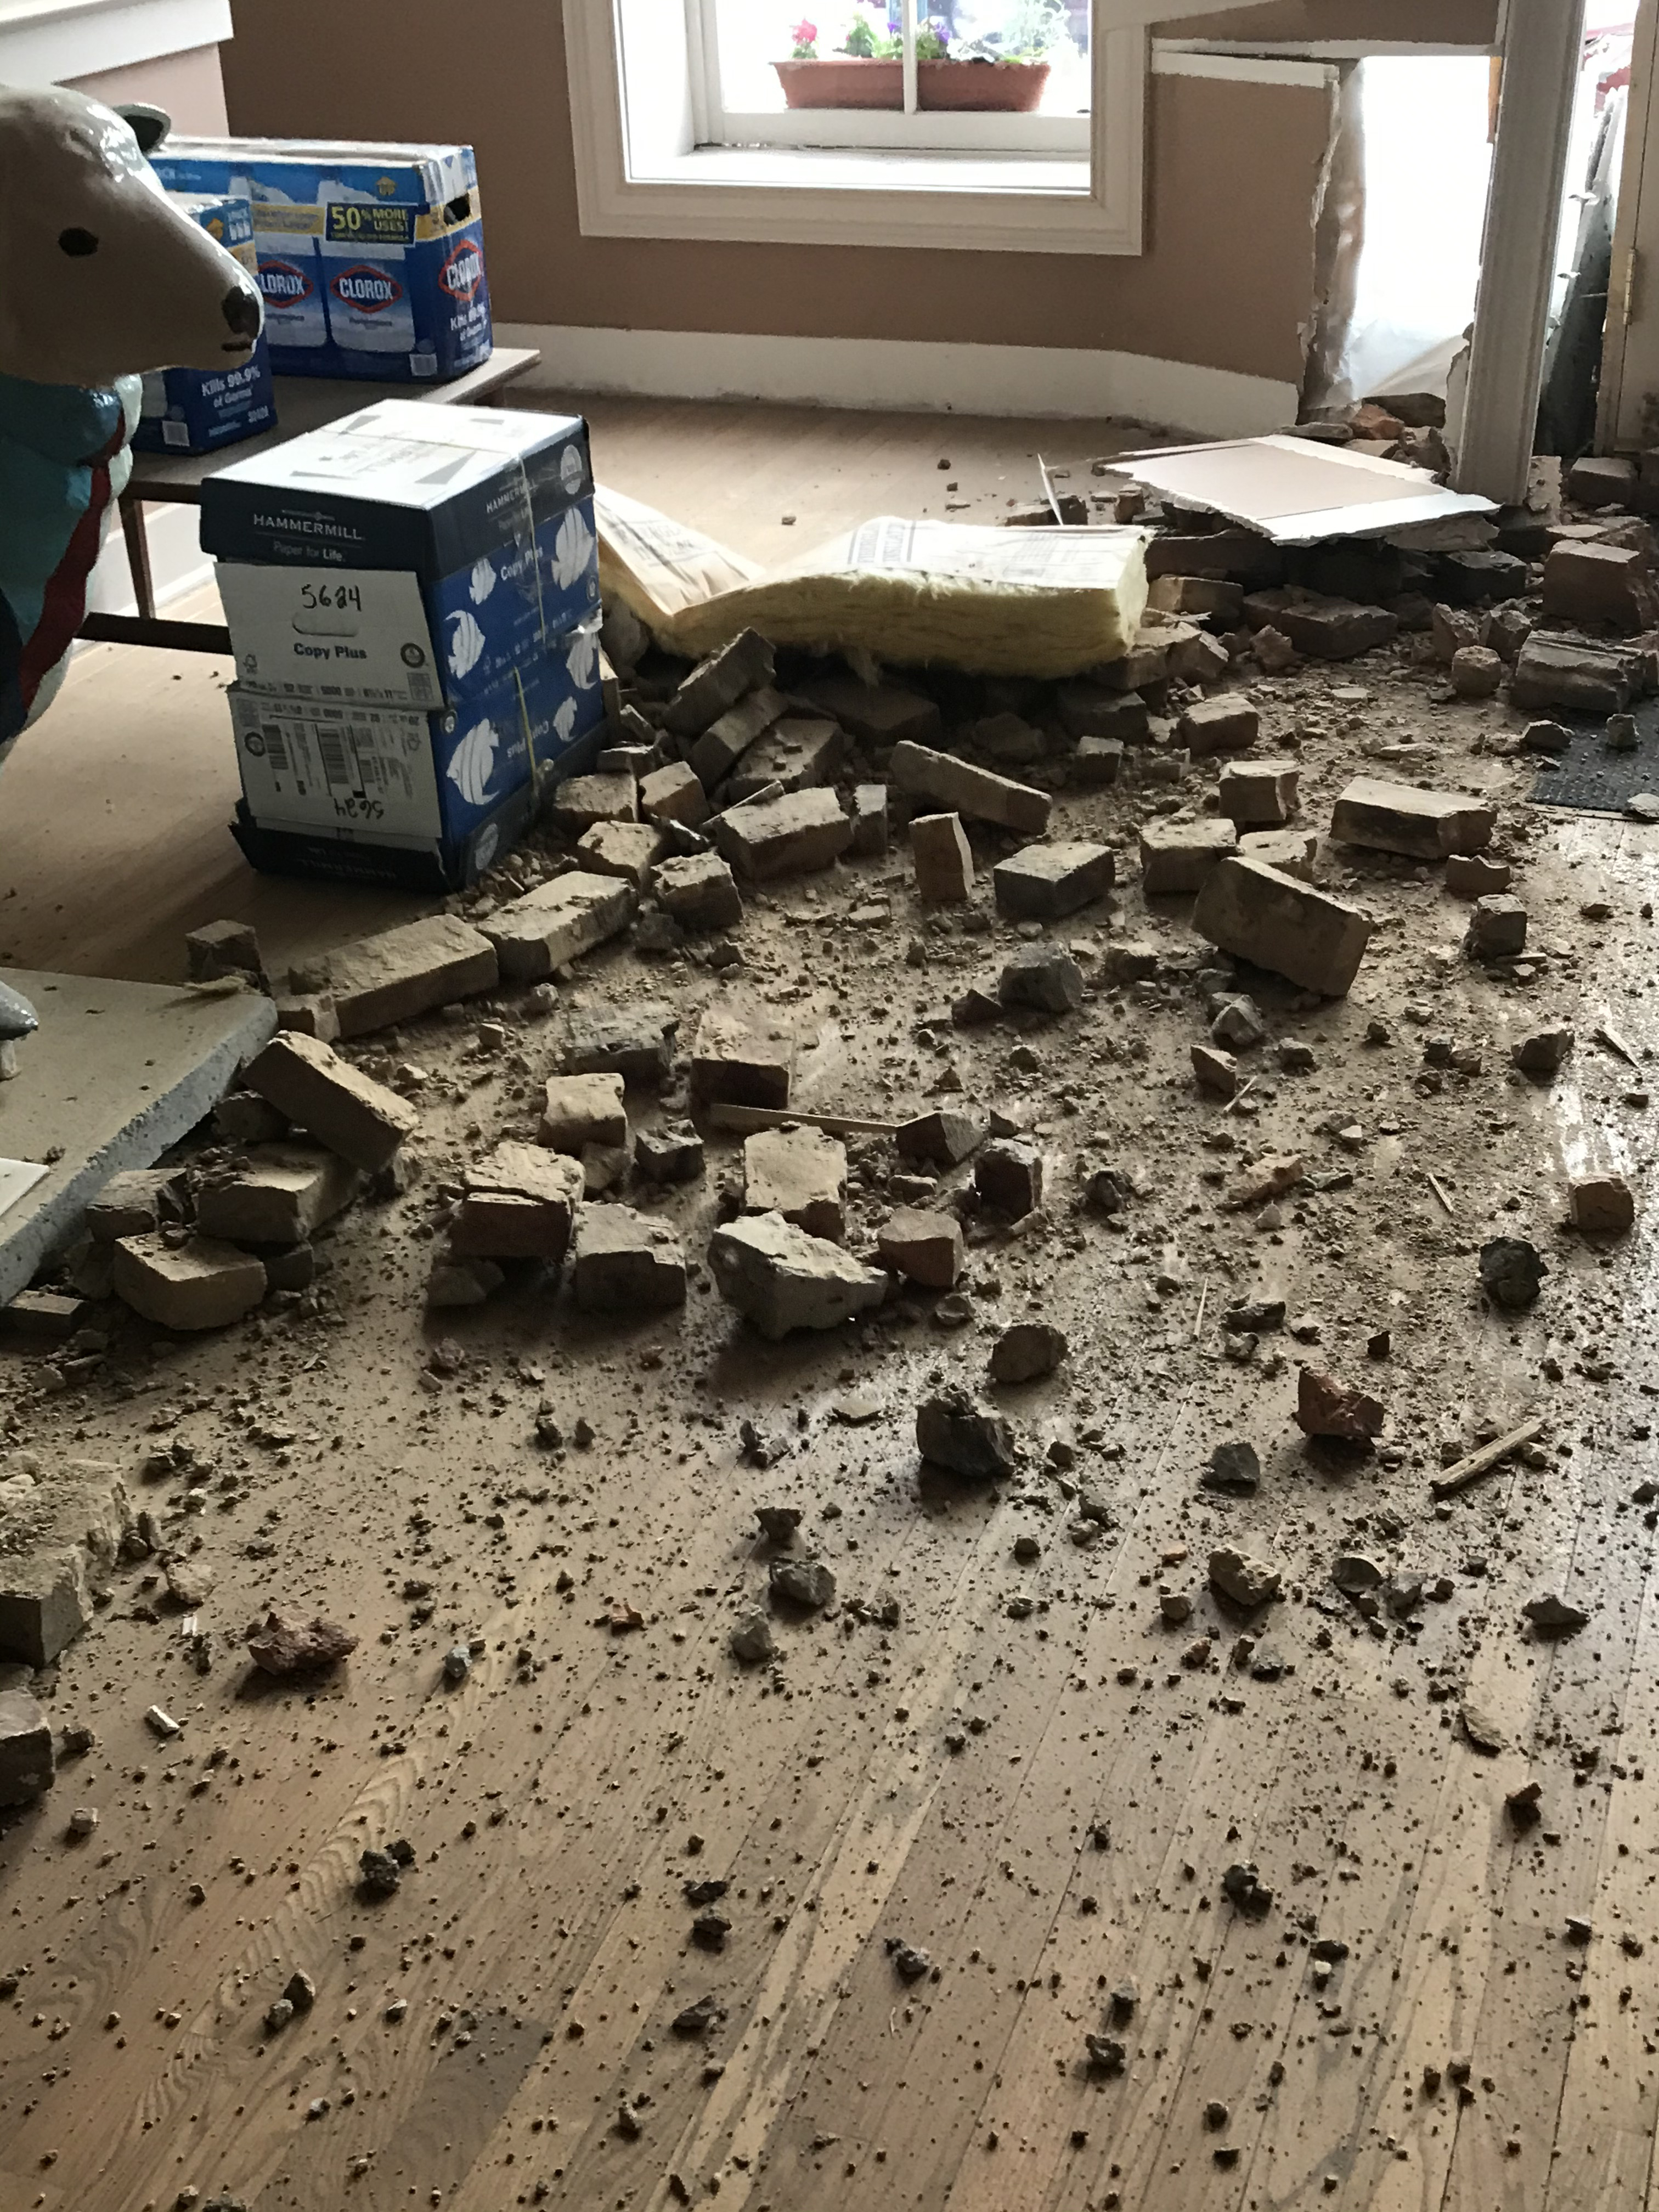 Brick was strewn about on the inside of the building